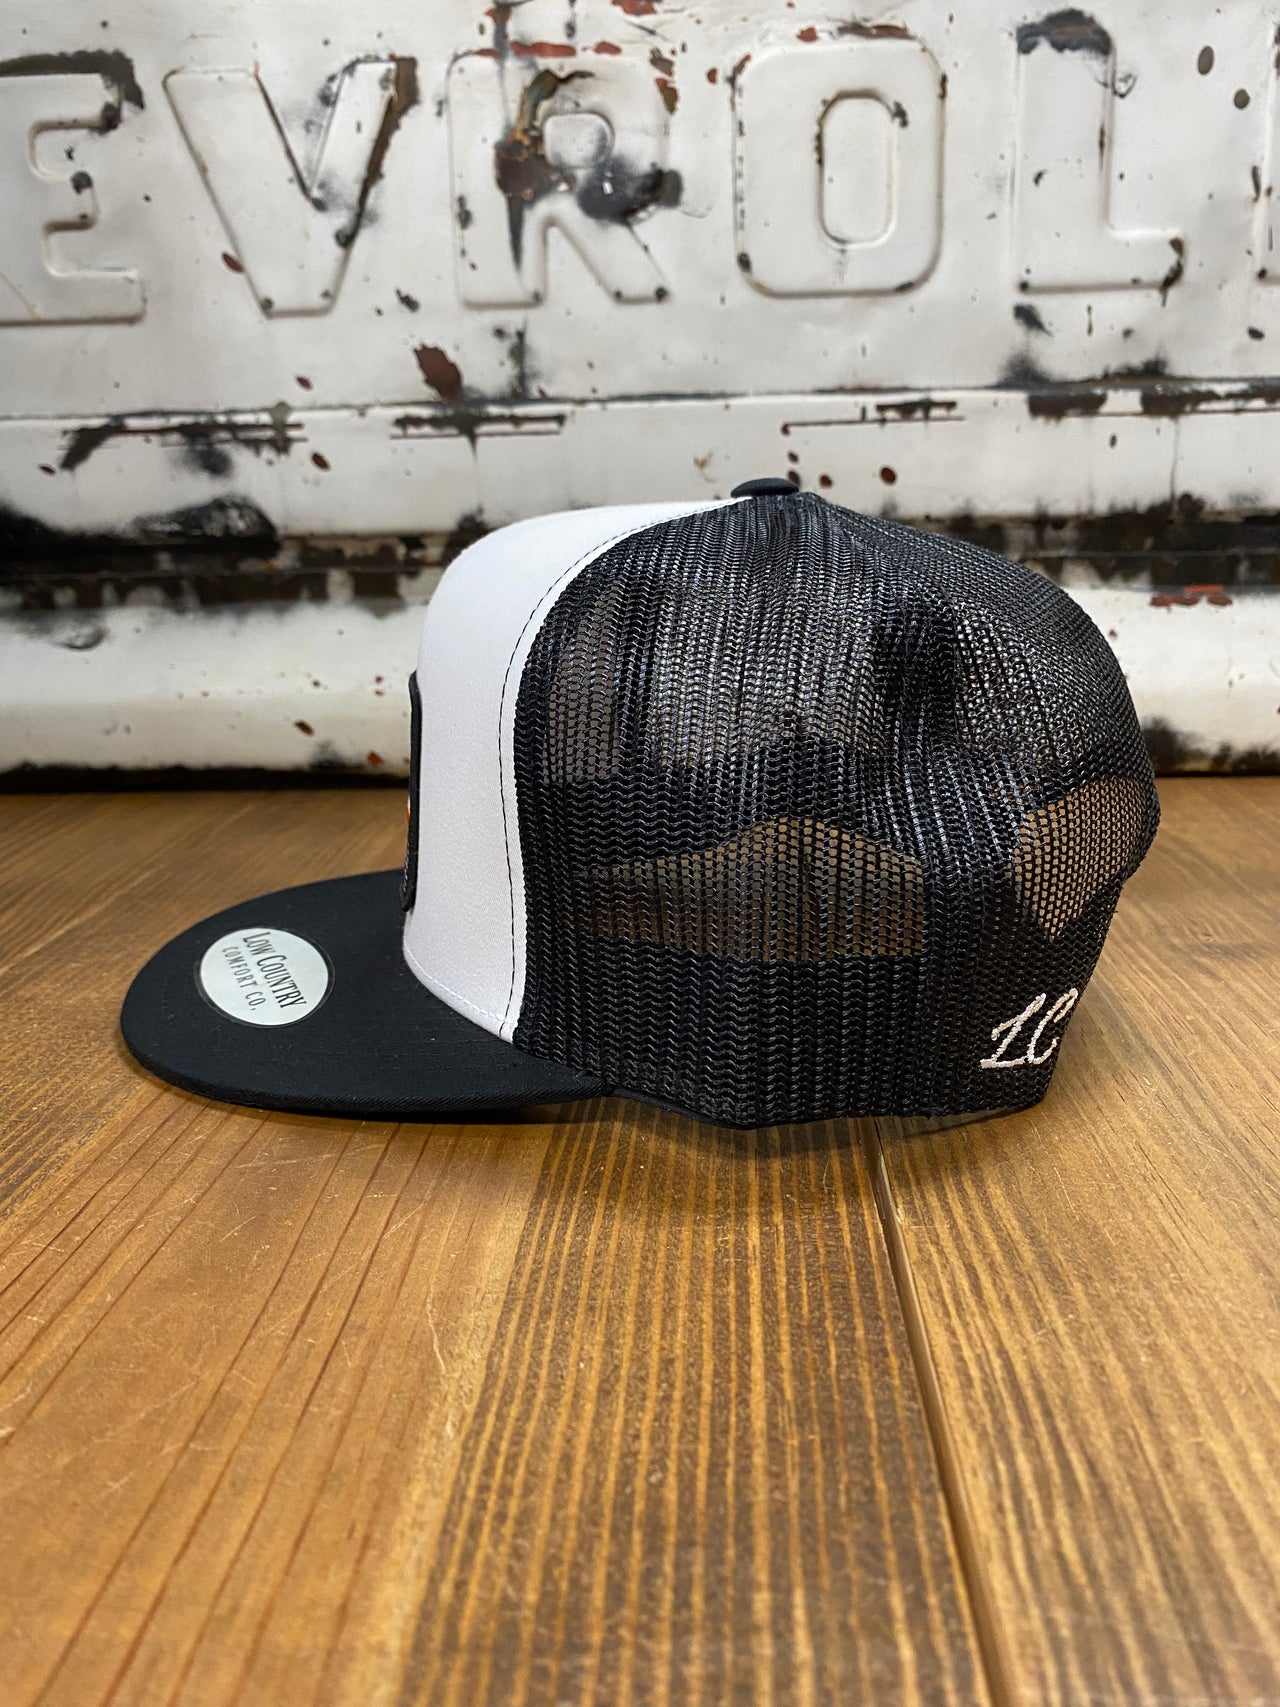 Black/White/Black Reckless Soul Eagle Patch 5 Panel Cap - A stylish masterpiece with a vibrant embroidered eagle patch. Durable 5-panel construction for a snug fit. Express your bold and untamed spirit with this daring accessory, perfect for any occasion.